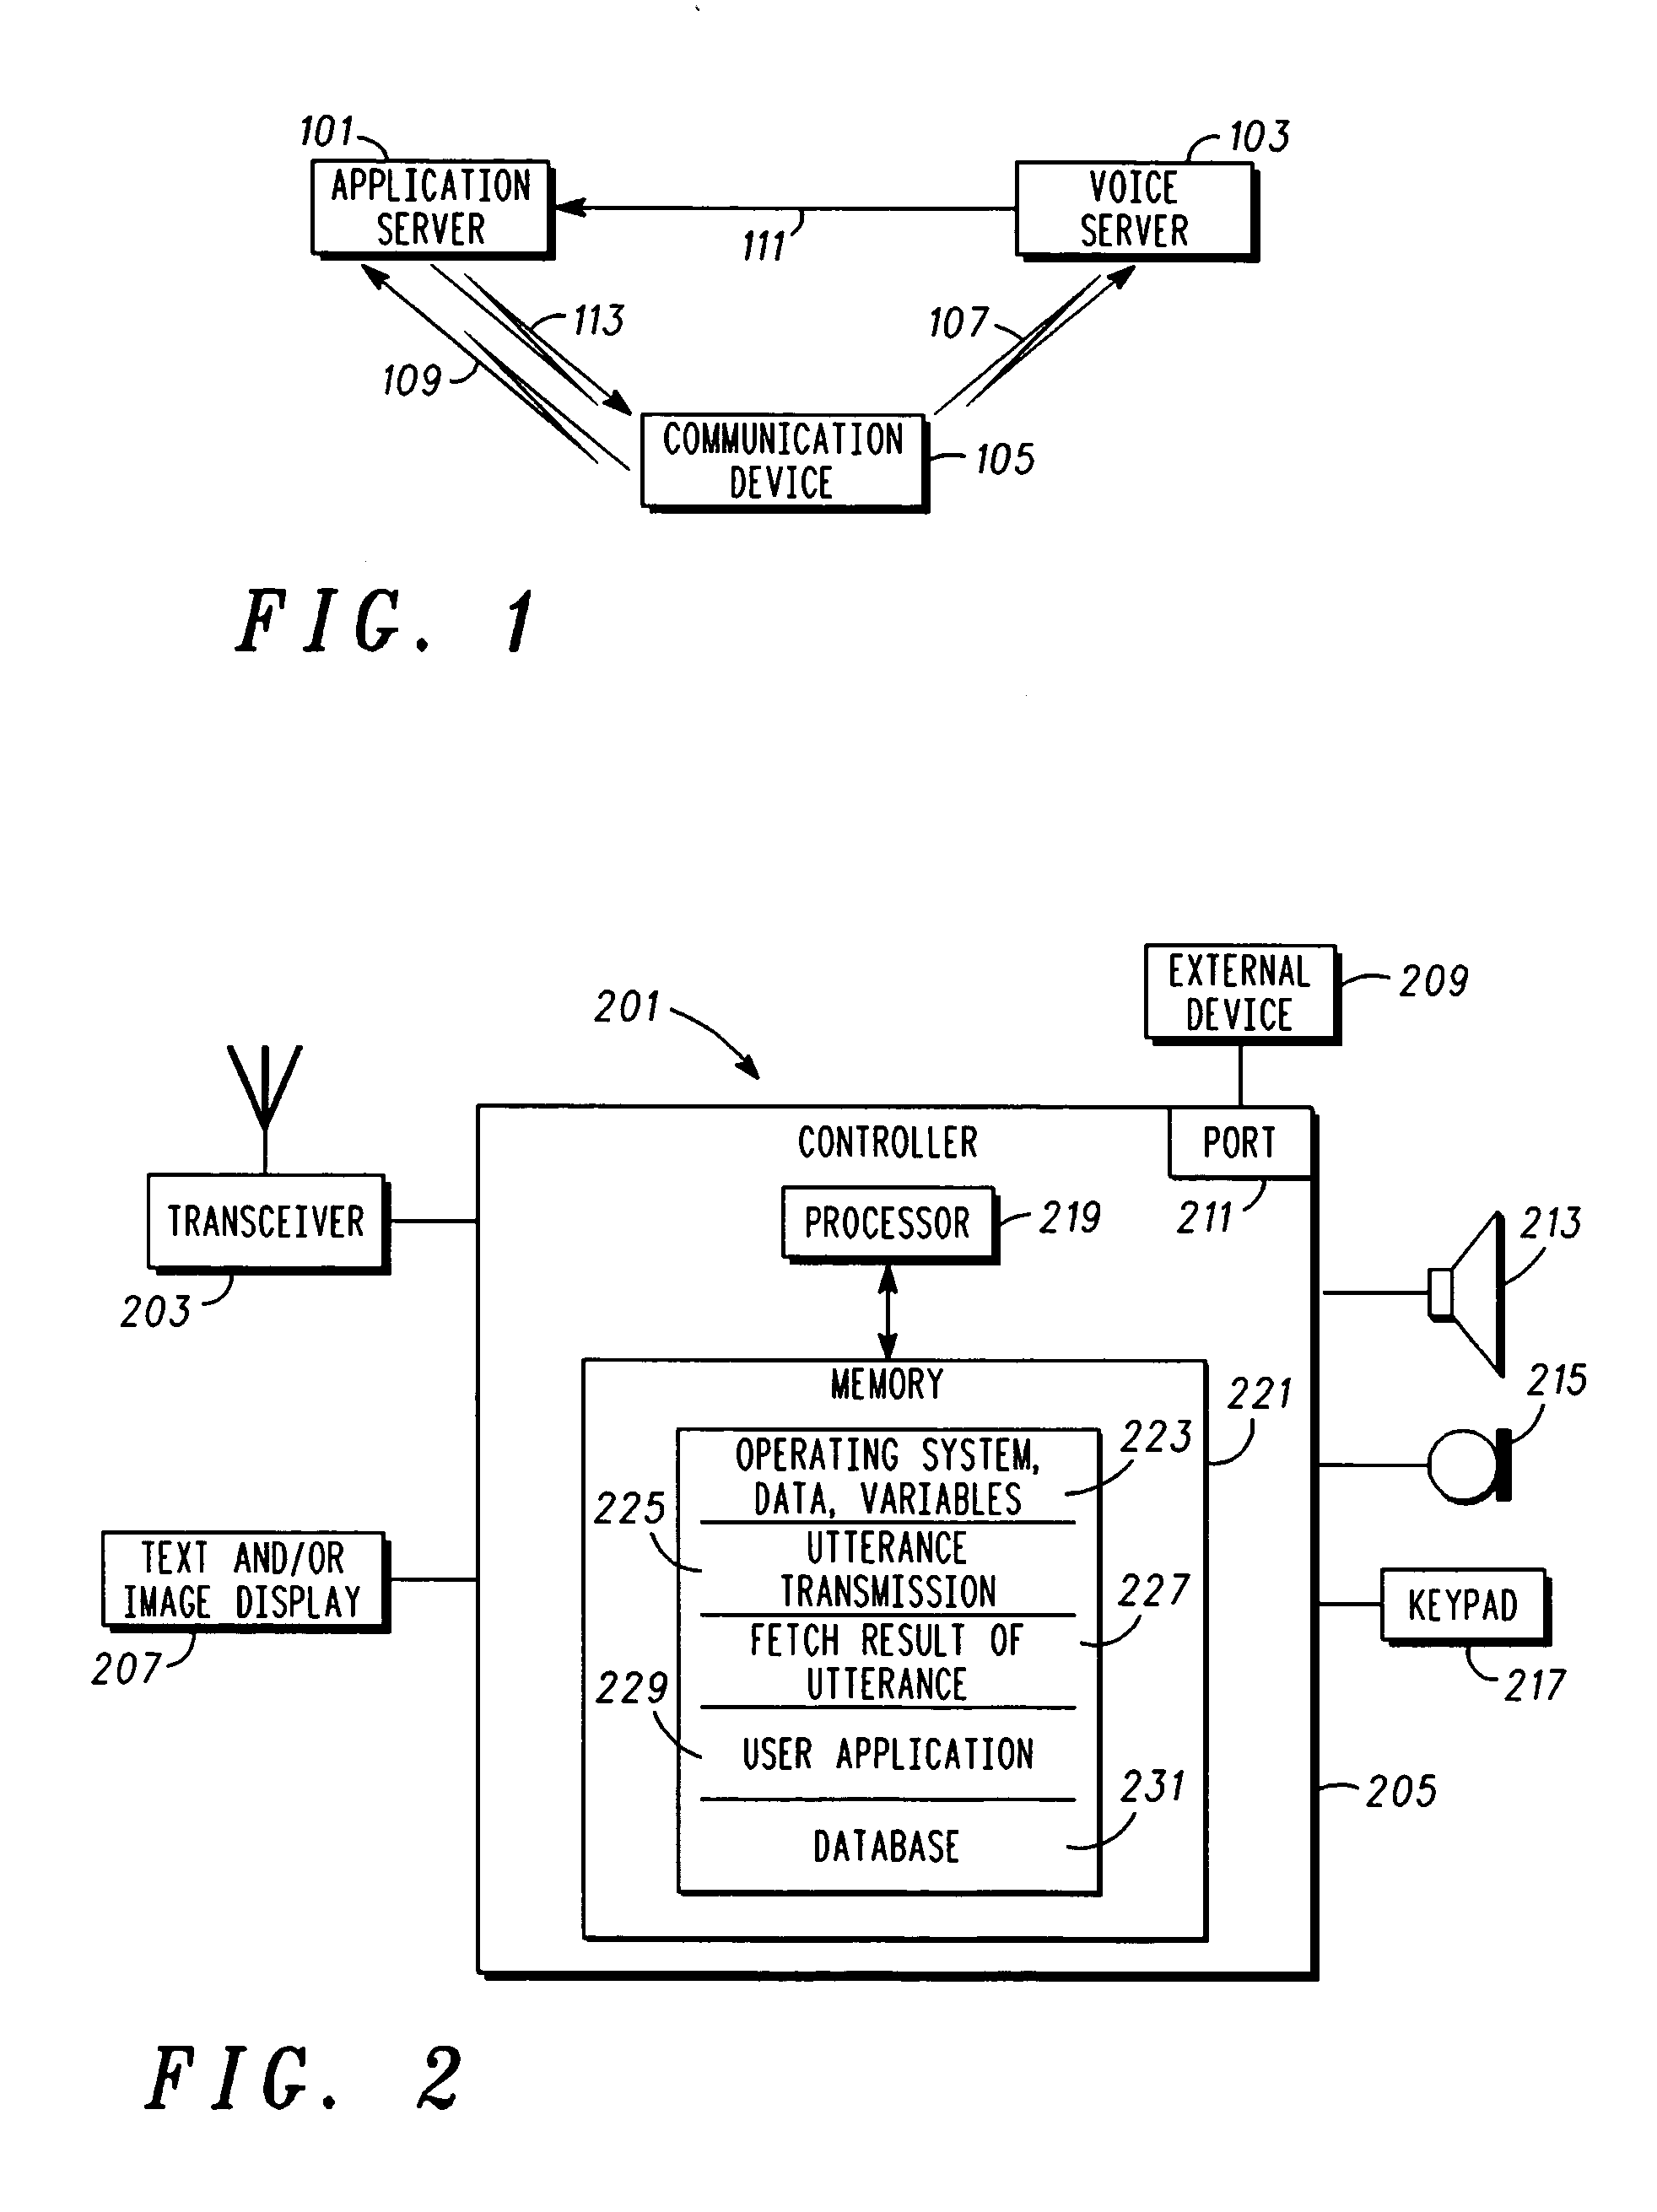 Method and apparatus for distributed speech applications